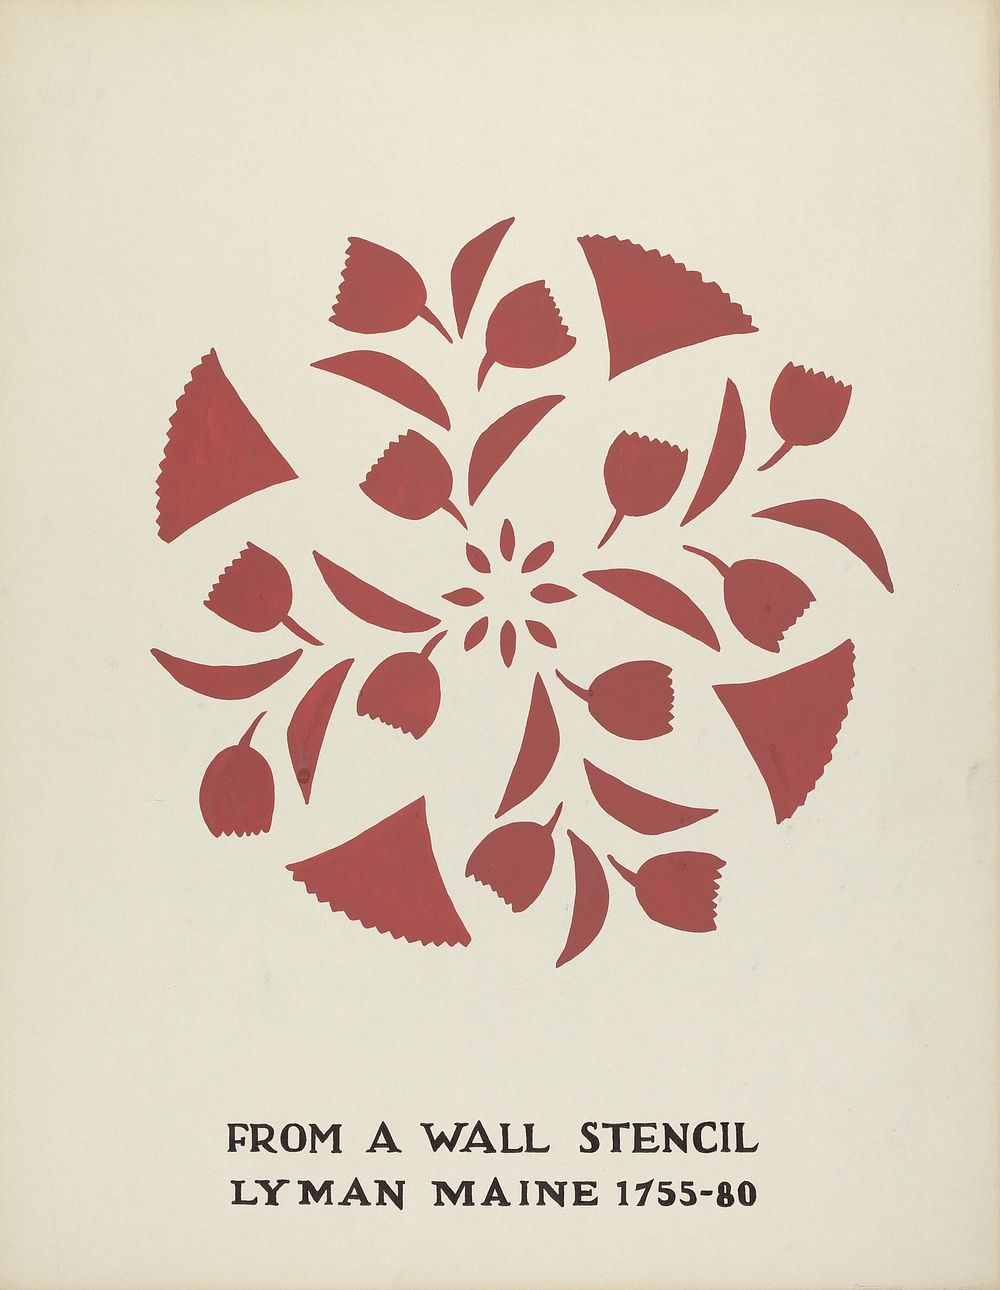 Design from Lyman, Maine 1755-1780: From Proposed Portfolio "Maine Wall Stencils" (1935&ndash;1942) by Mildred E. Bent.  